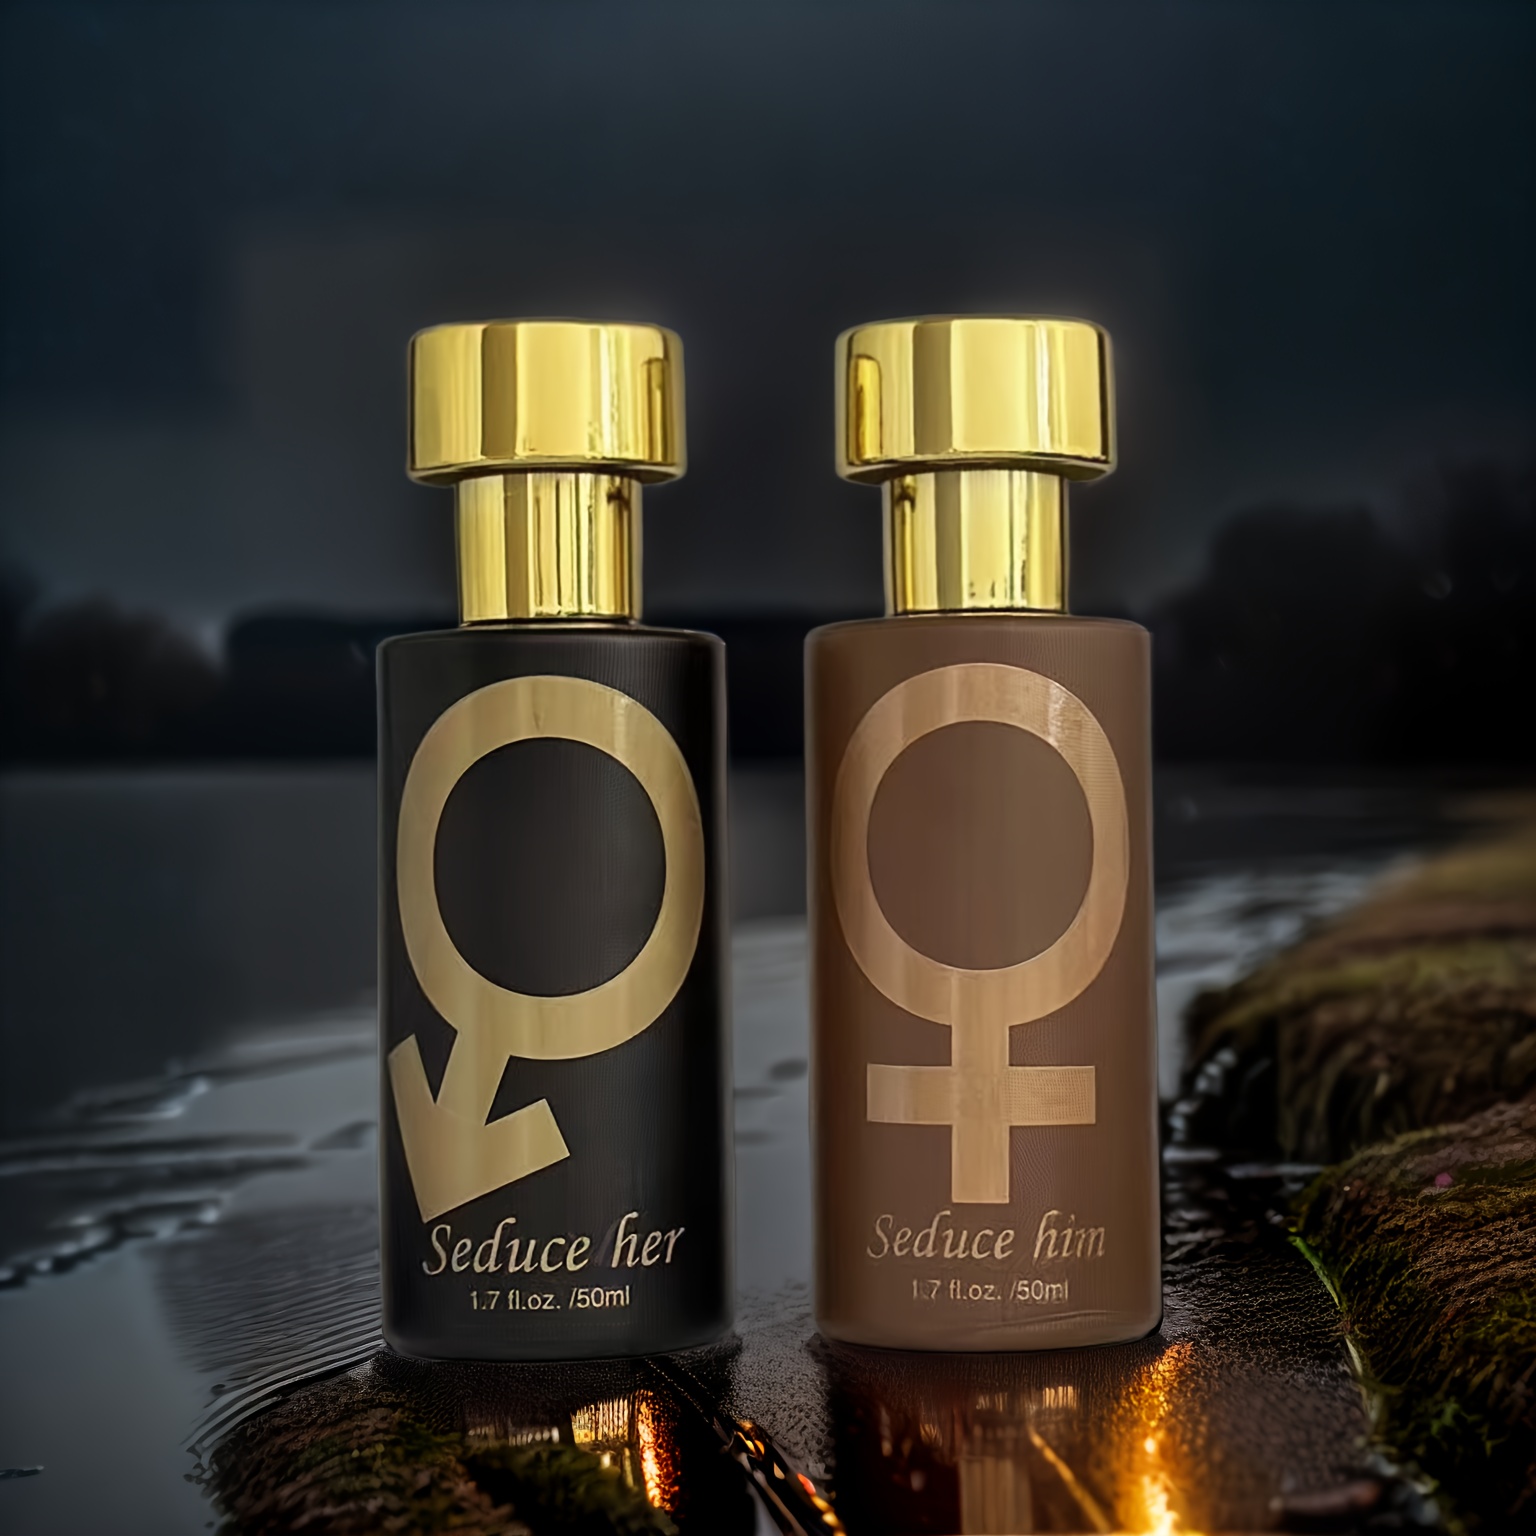 Pheromone Perfume For Men And Women,Attracting The Other Sex,Enhancing Your  Charm,Long Lasting Fragrance